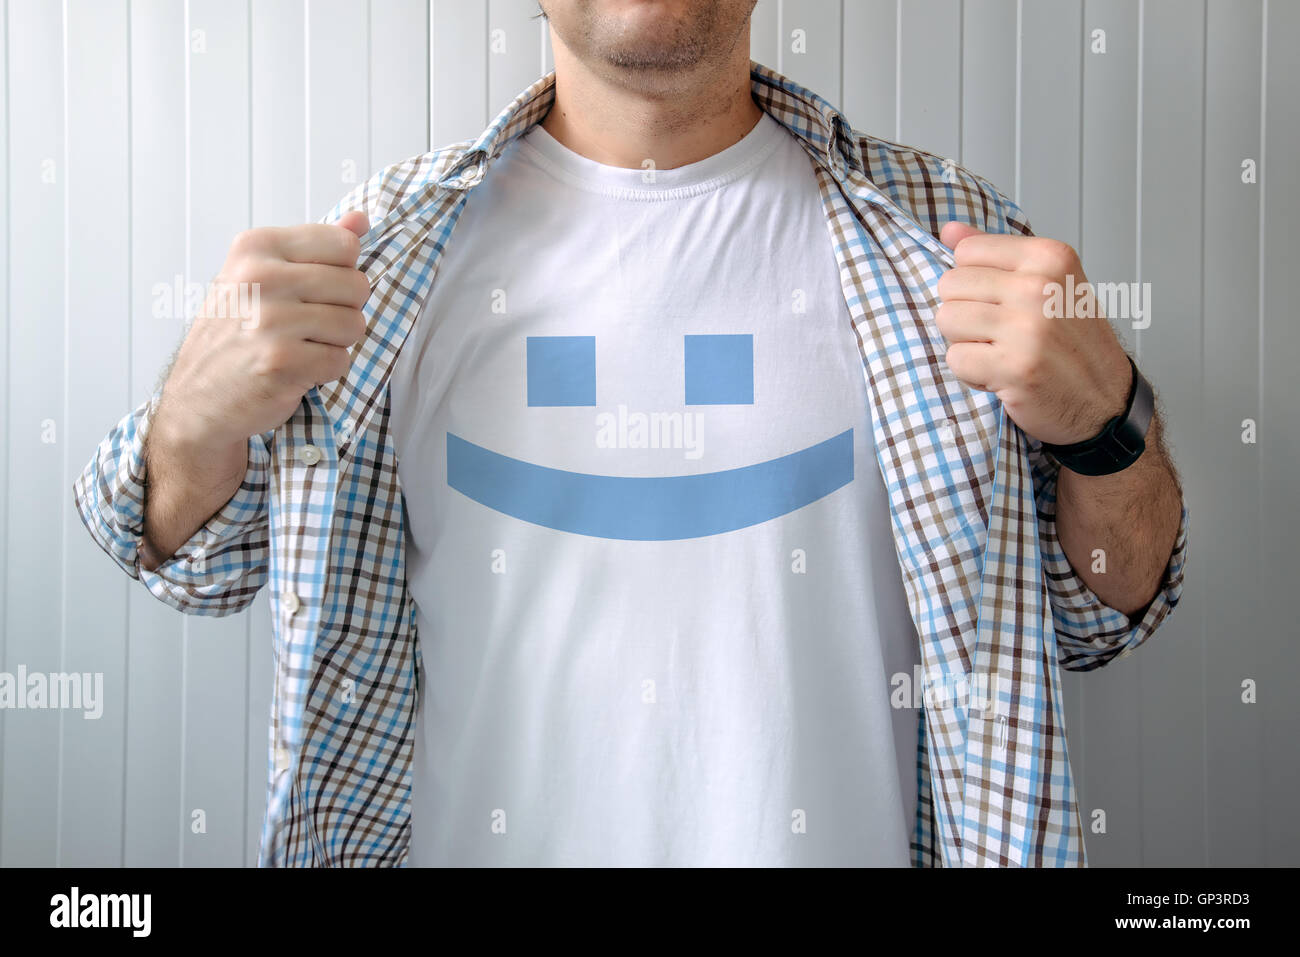 Man stretching shirt to reveal smiley emoticon printed on chest Stock Photo